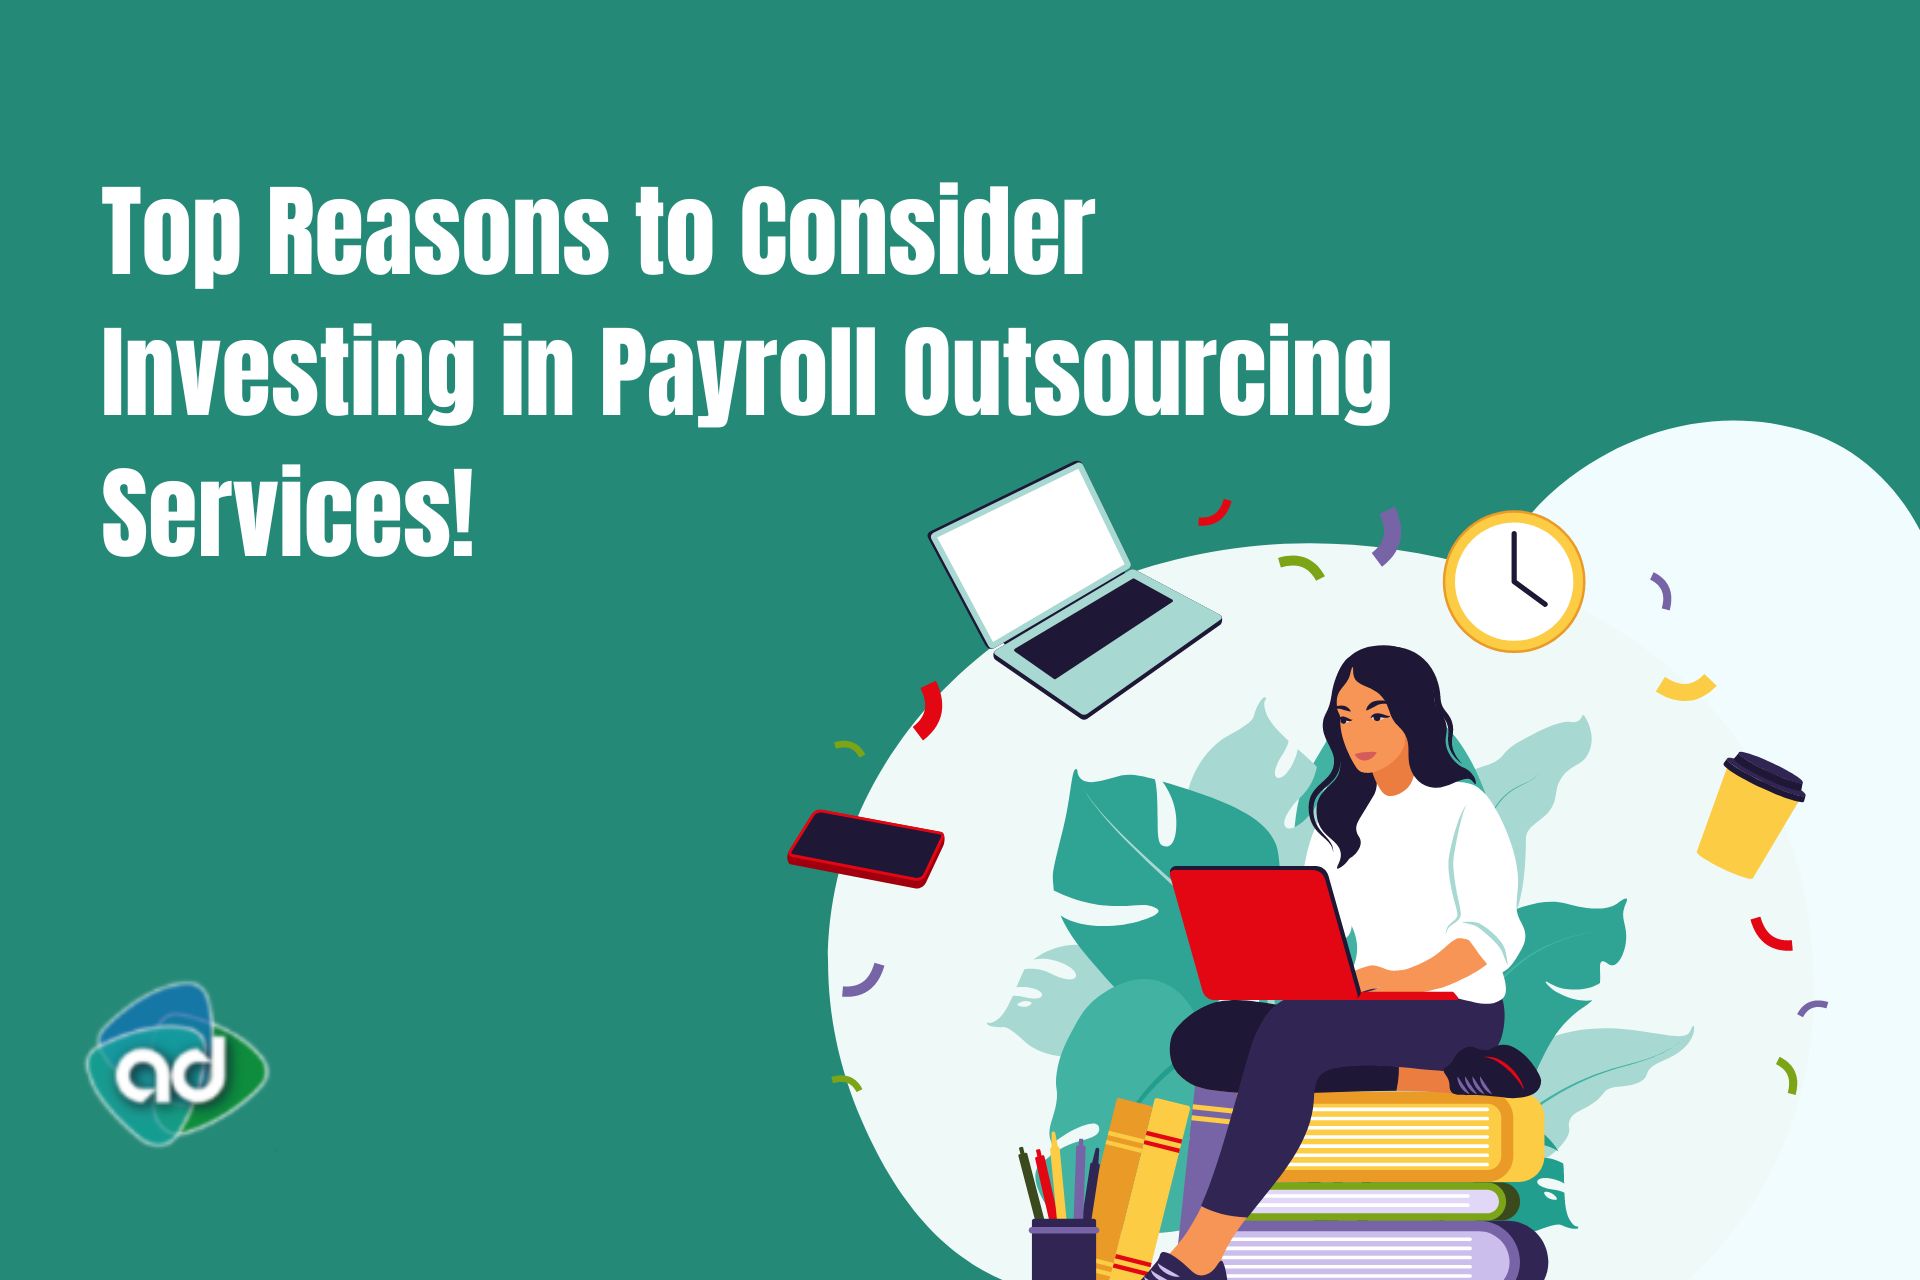 Top Reasons to Consider Investing in Payroll Outsourcing Services